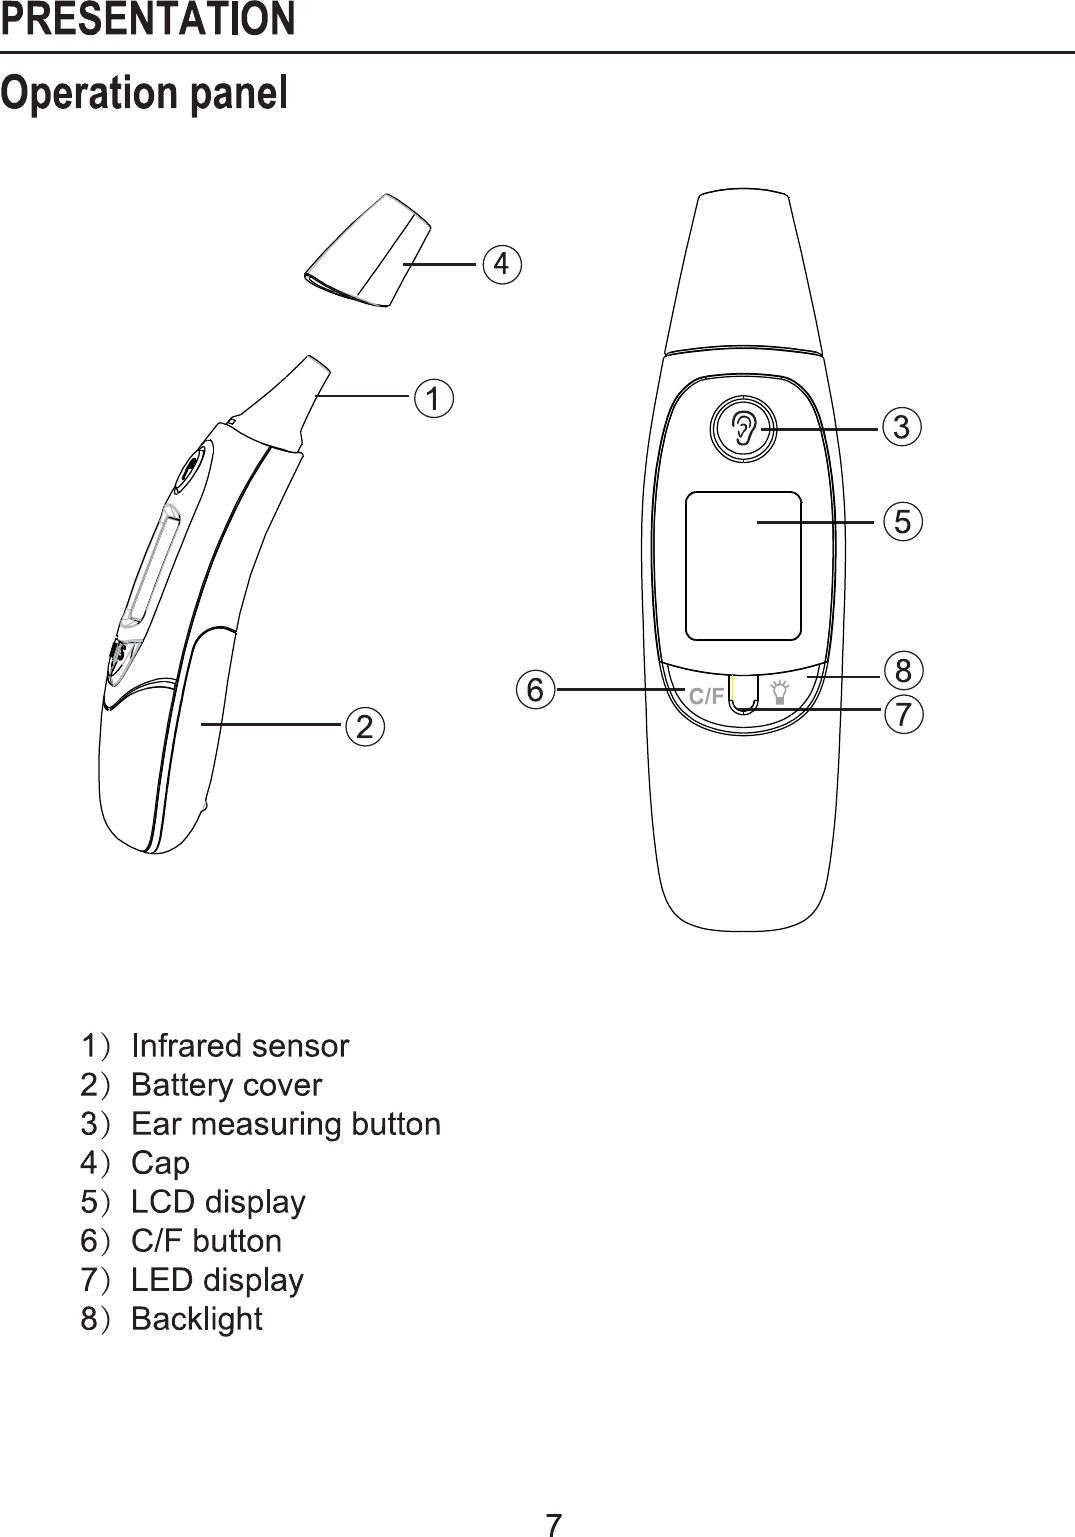 Page 7 of Dongdixin Technology BLUENRG-V10 Digital Ear Thermometer User Manual